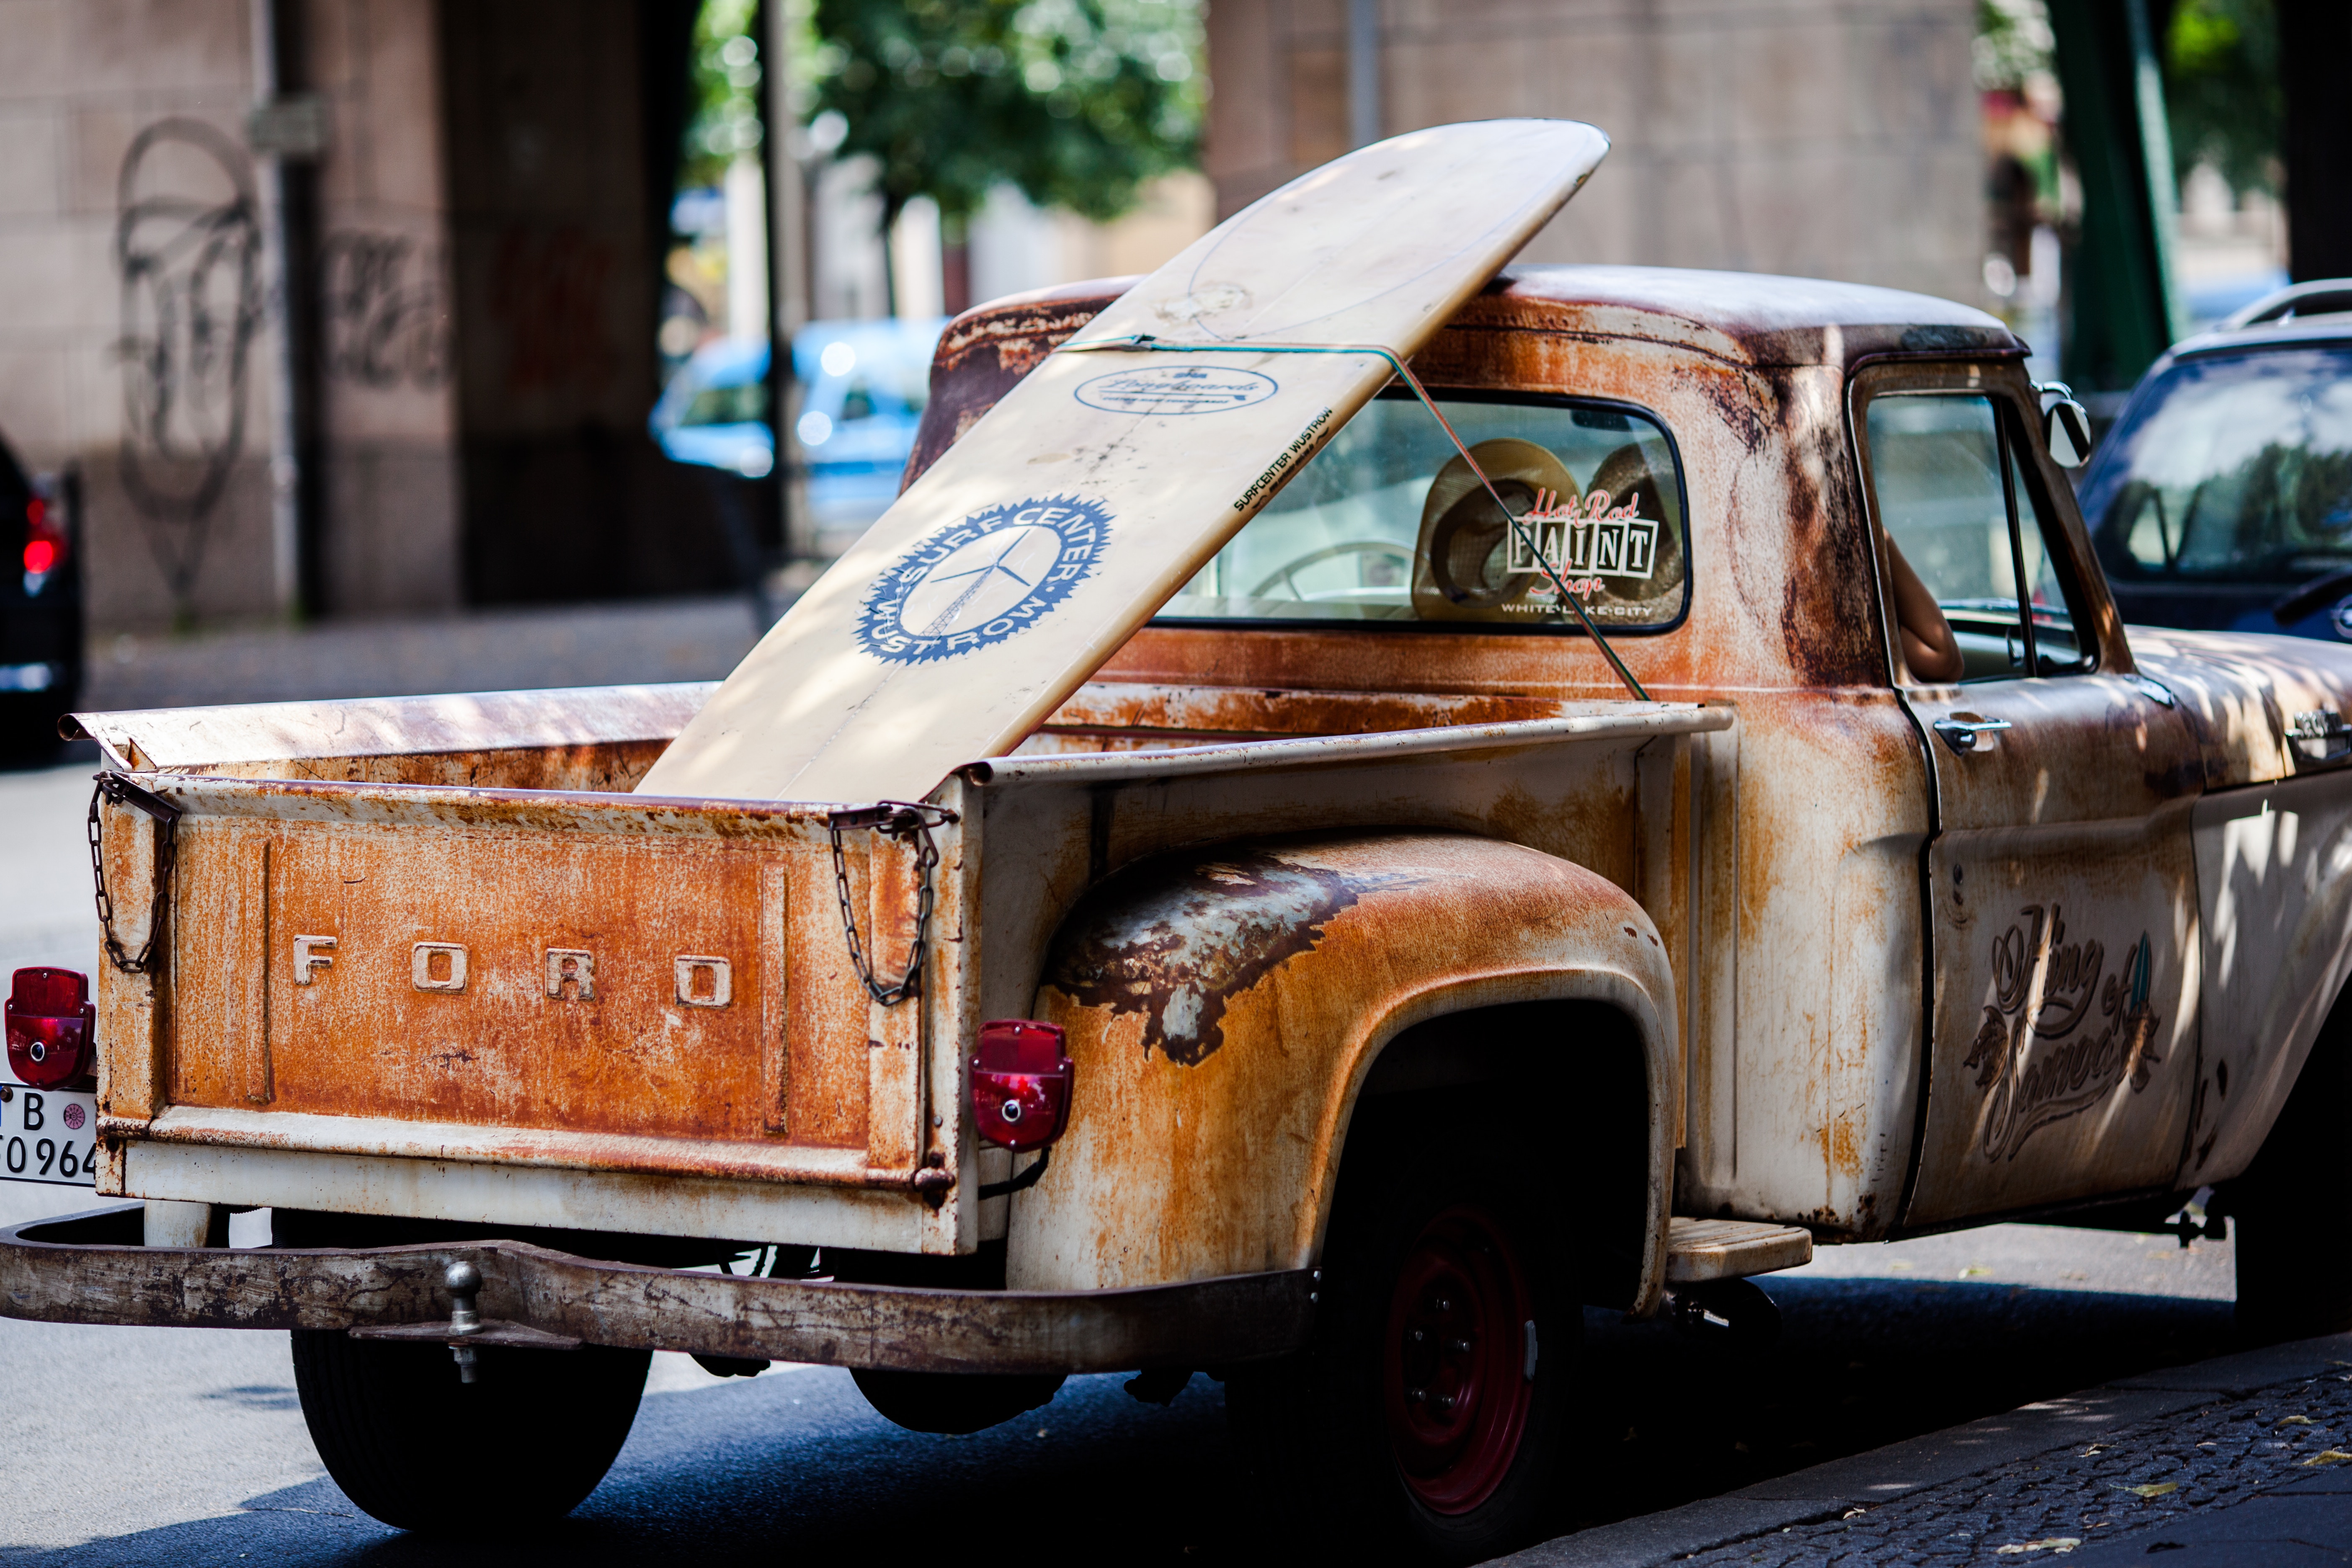 Image shows a very rusty Ford truck with a surfboard in the back.